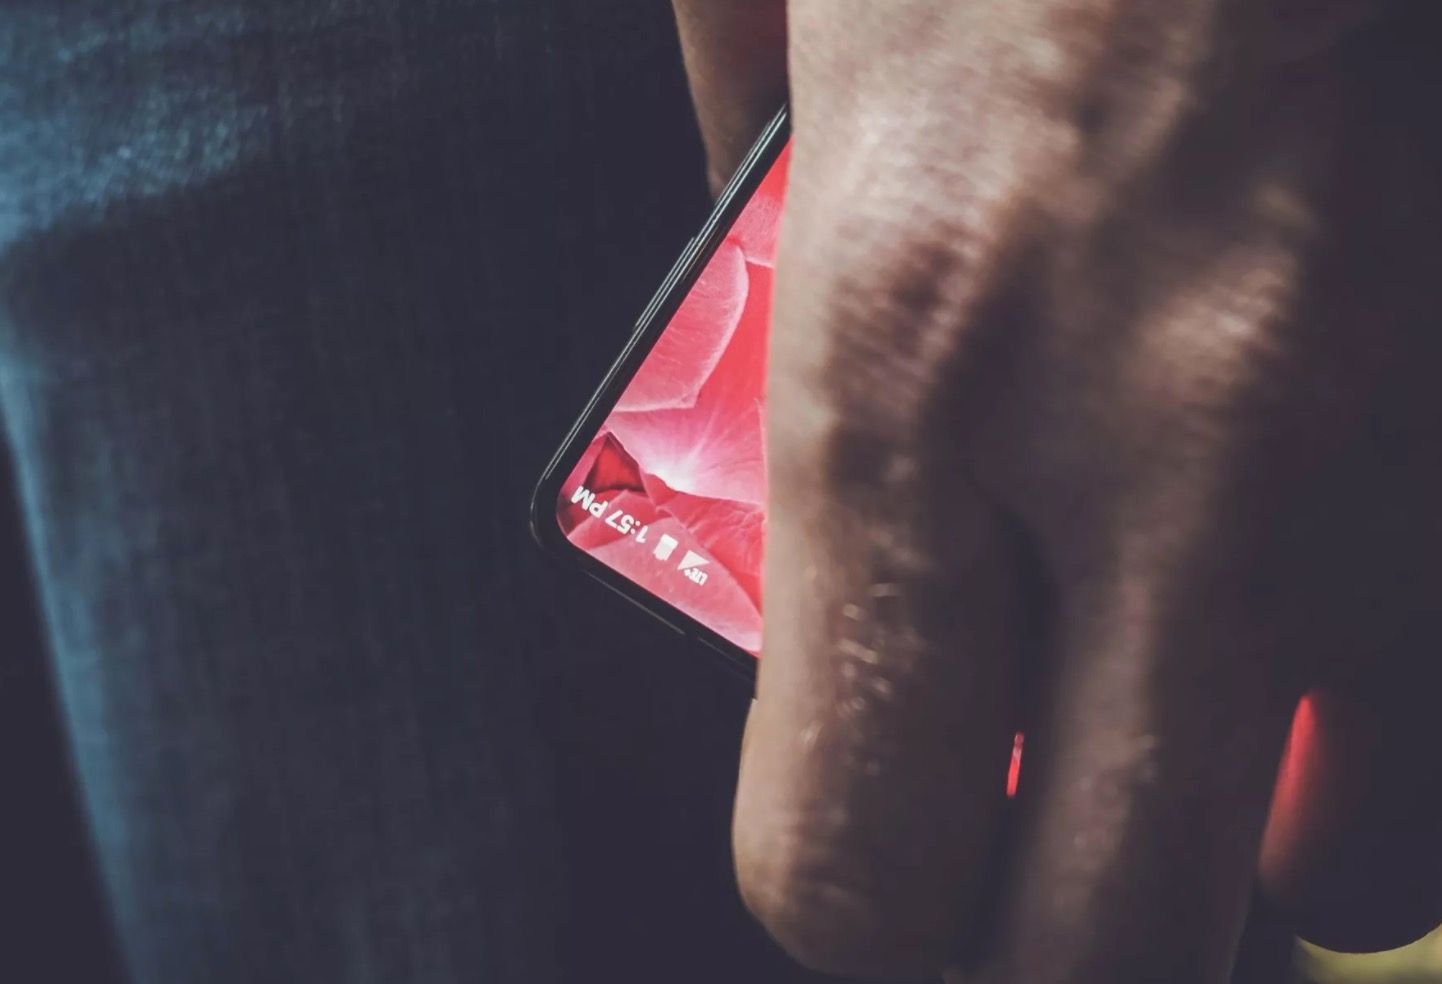 android s co founder might unveil his new essential phone next week image 1